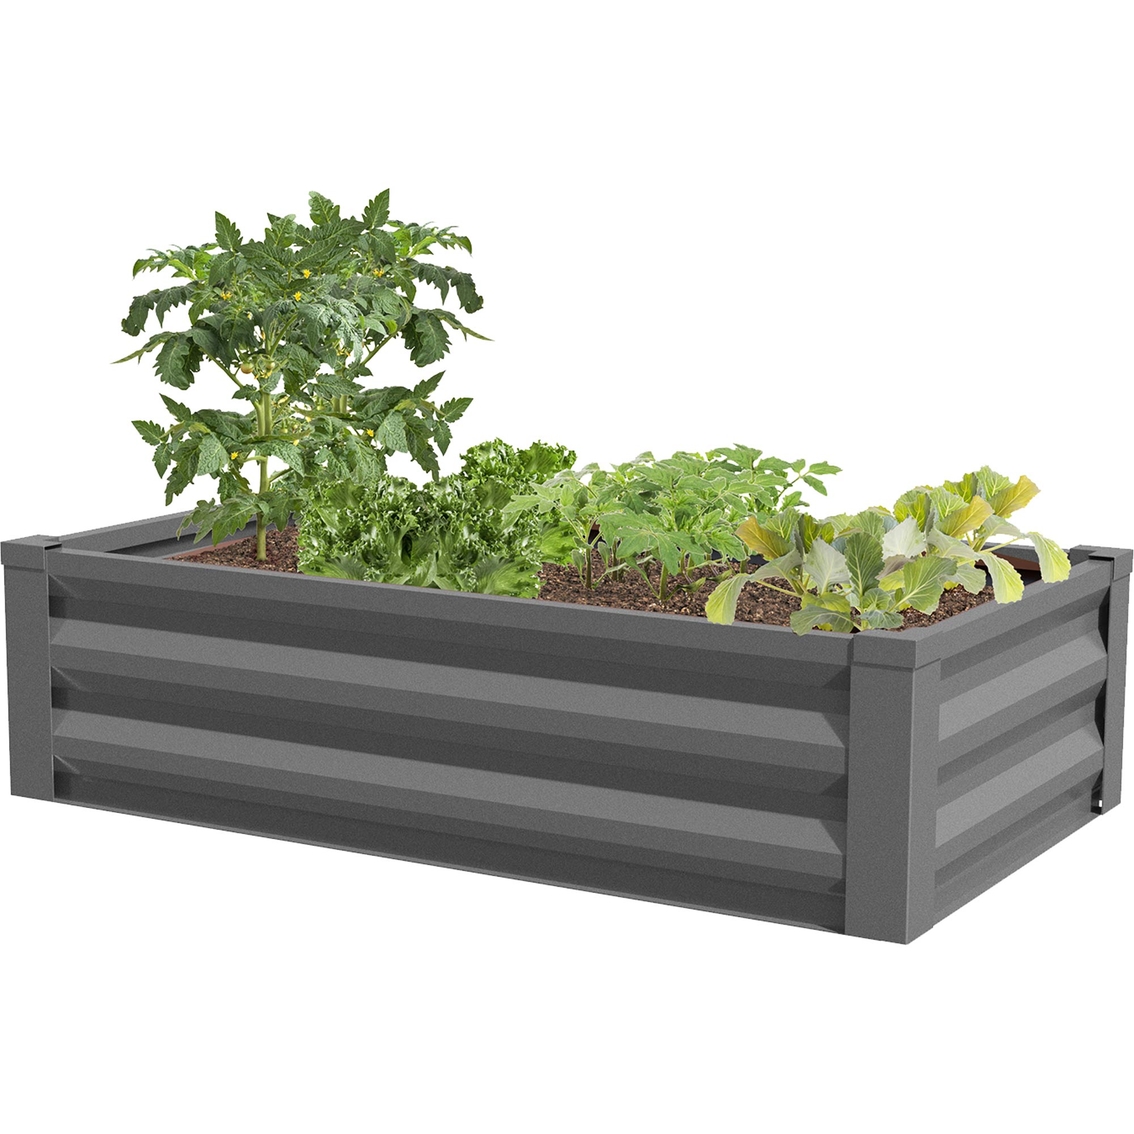 Greenes Fence Co. 48 x 24 x 10 in. Powder-Coated Metal Raised Garden Bed Planter